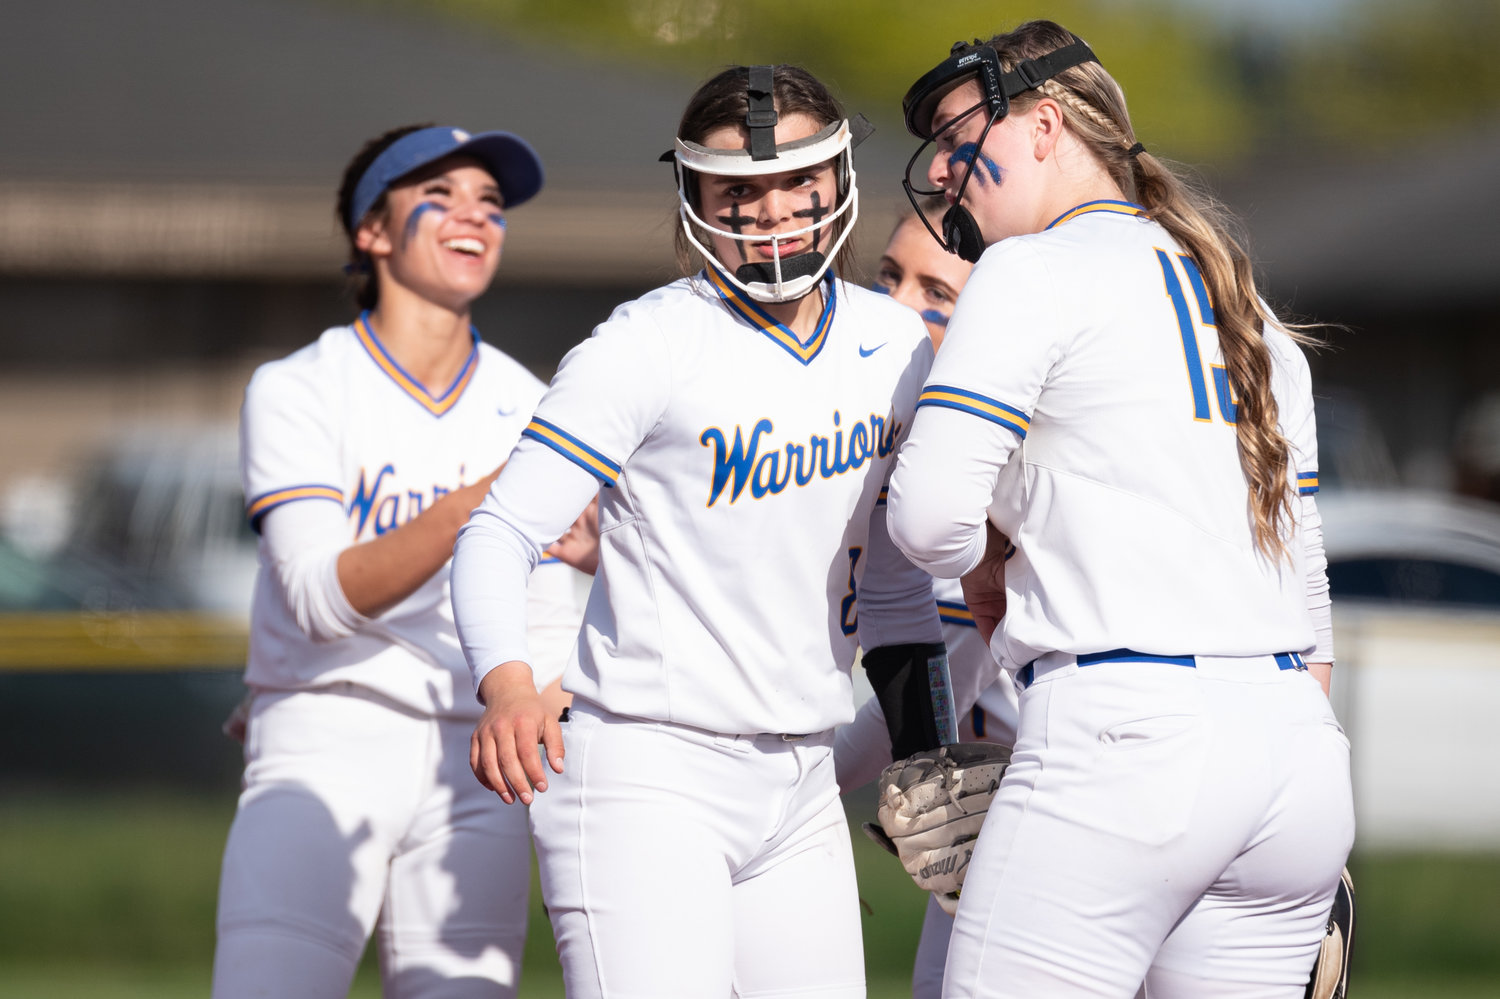 Rochester pitcher Layna Demers (center) celebrates with teammates after an out against Aberdeen in the 2A District 4 playoffs May 20 at Rec Park.